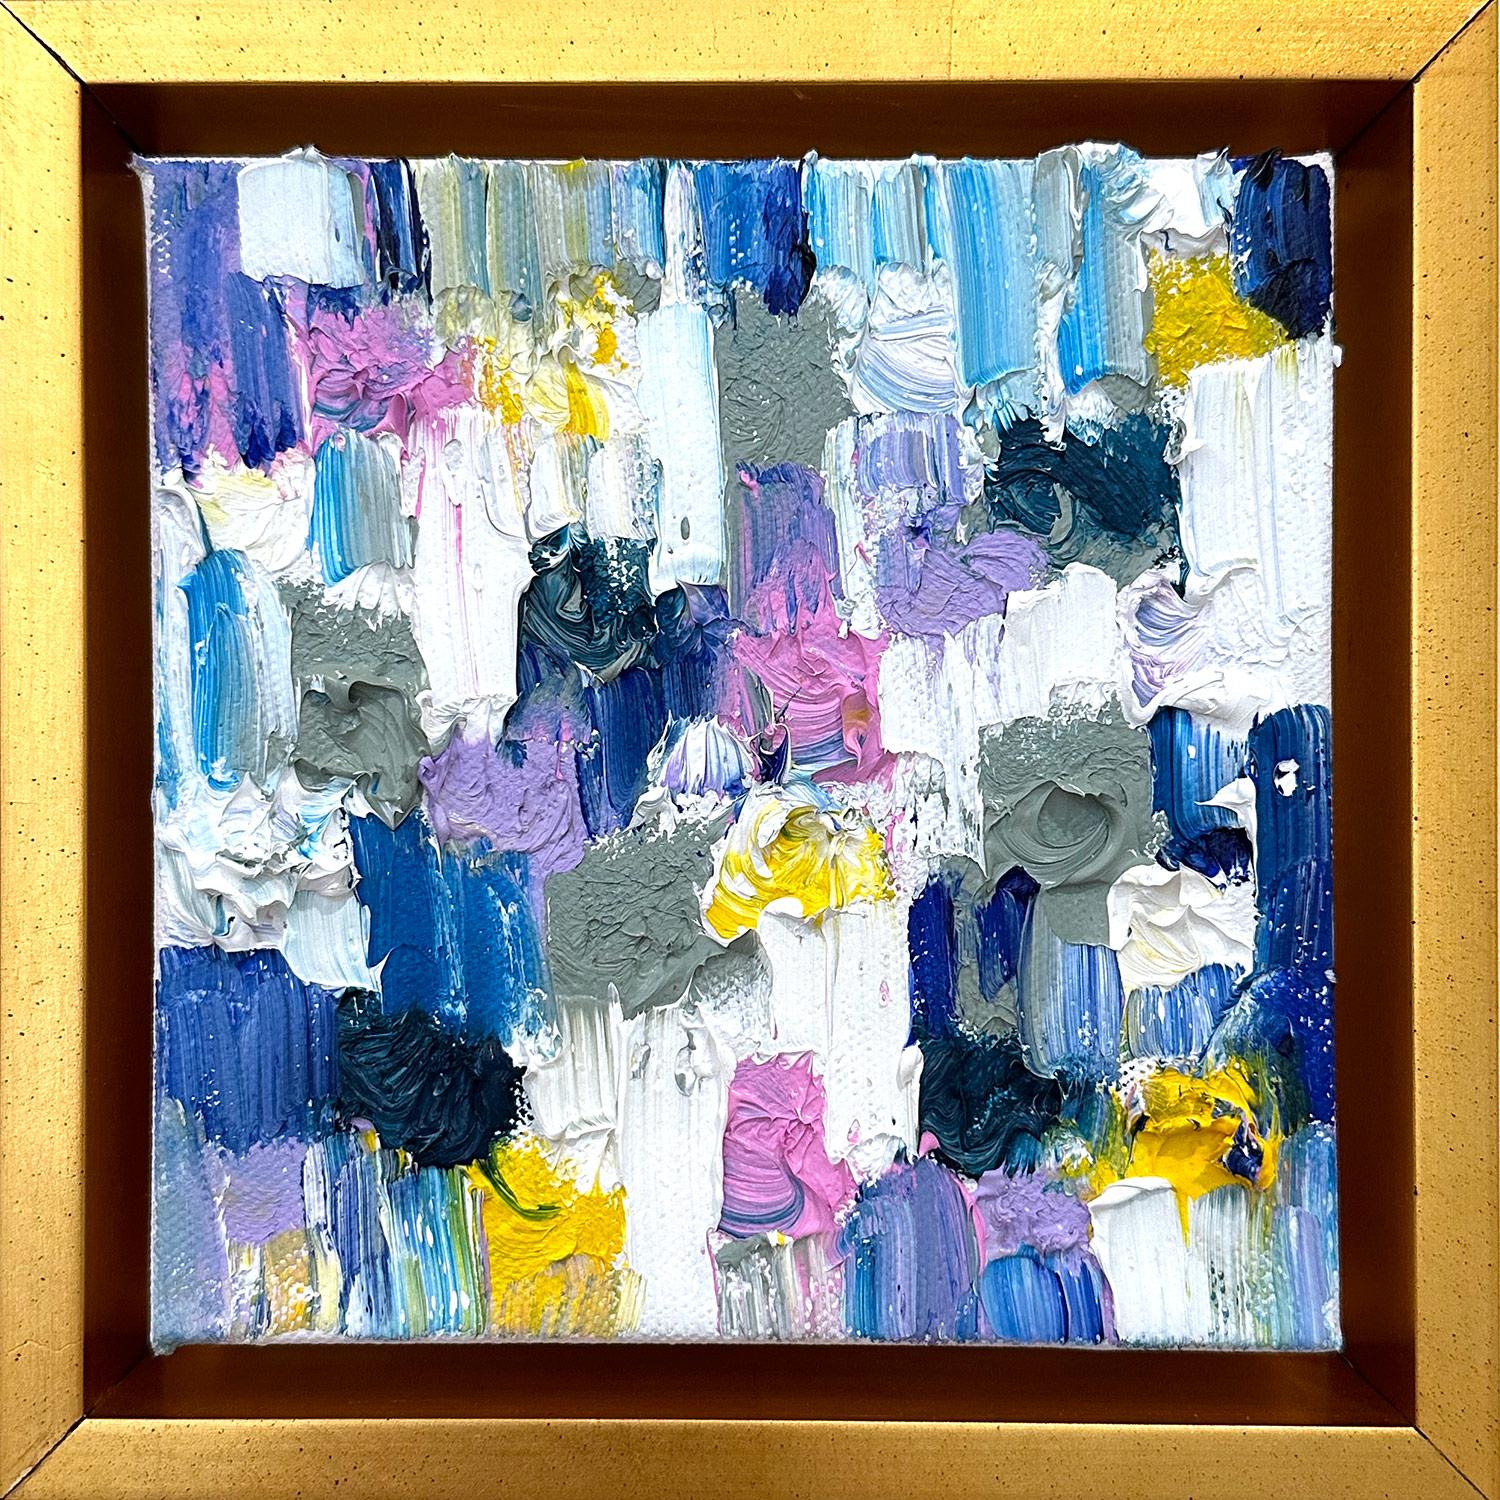 Cindy Shaoul Abstract Painting - "Dripping Dots - Calypso" Colorful Contemporary Oil Painting on Canvas Framed